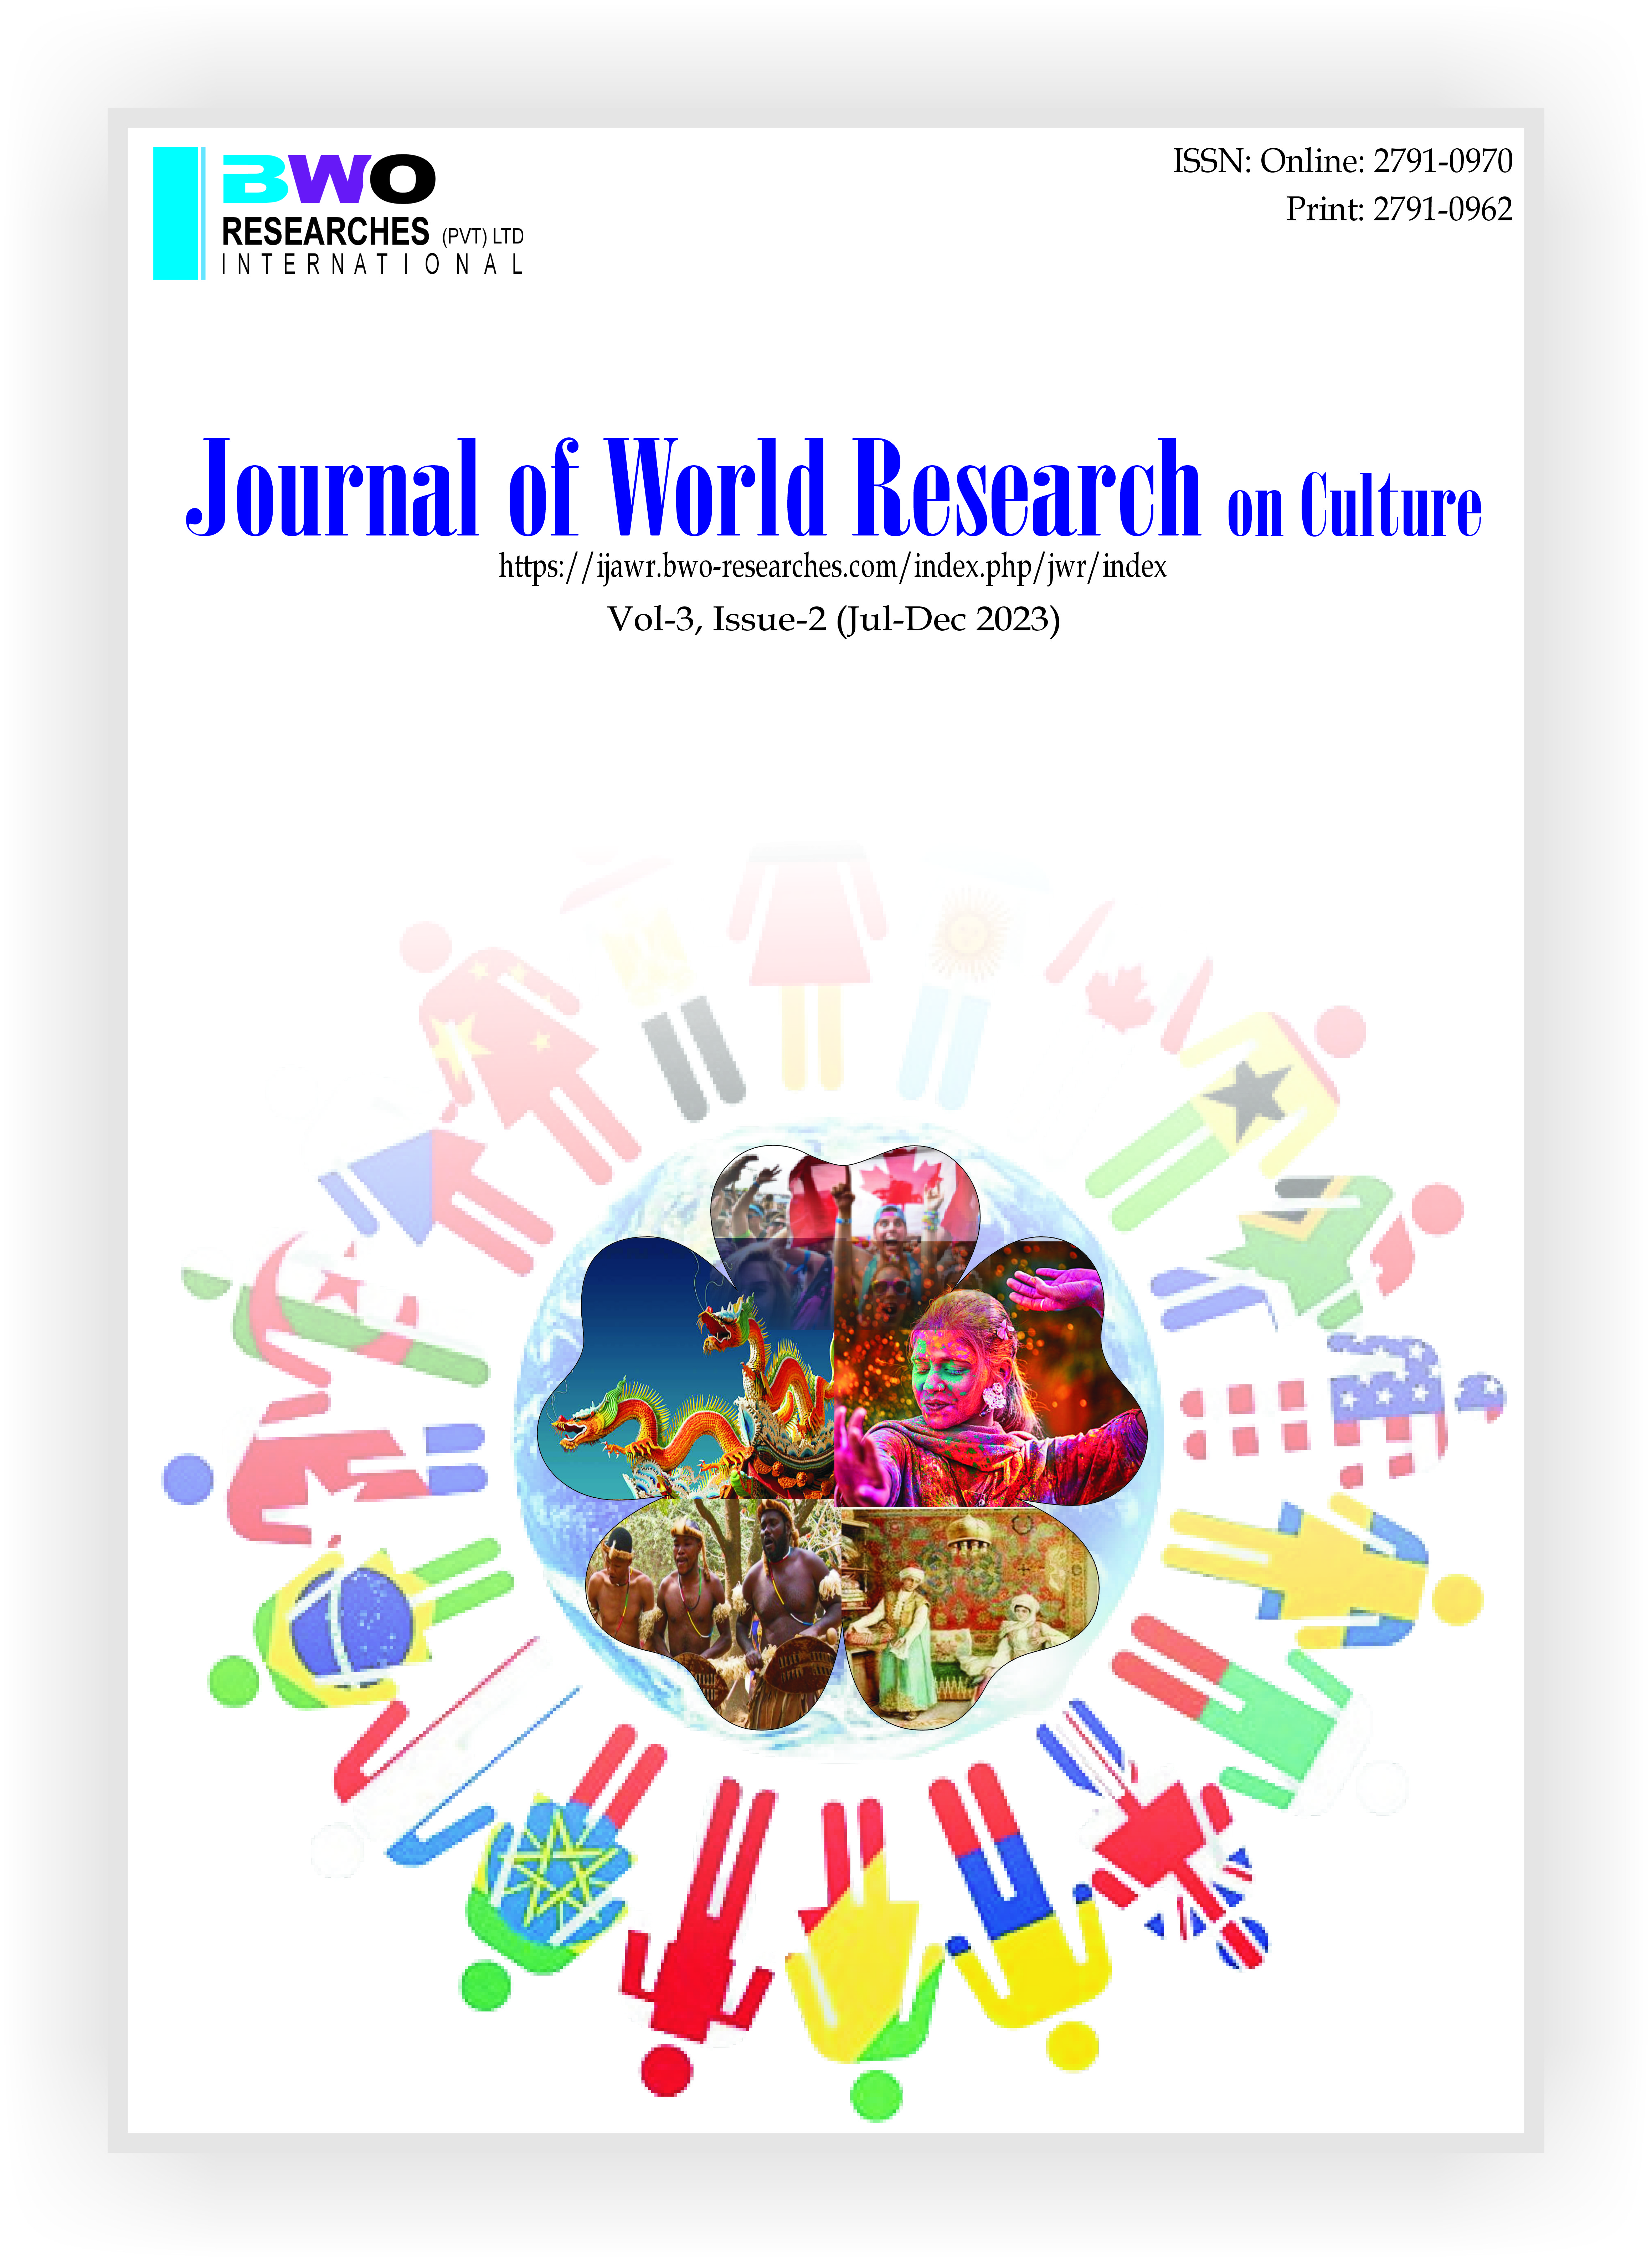 					Visualizar v. 3 n. 2 (2023): The Journal of World Research on Culture
				